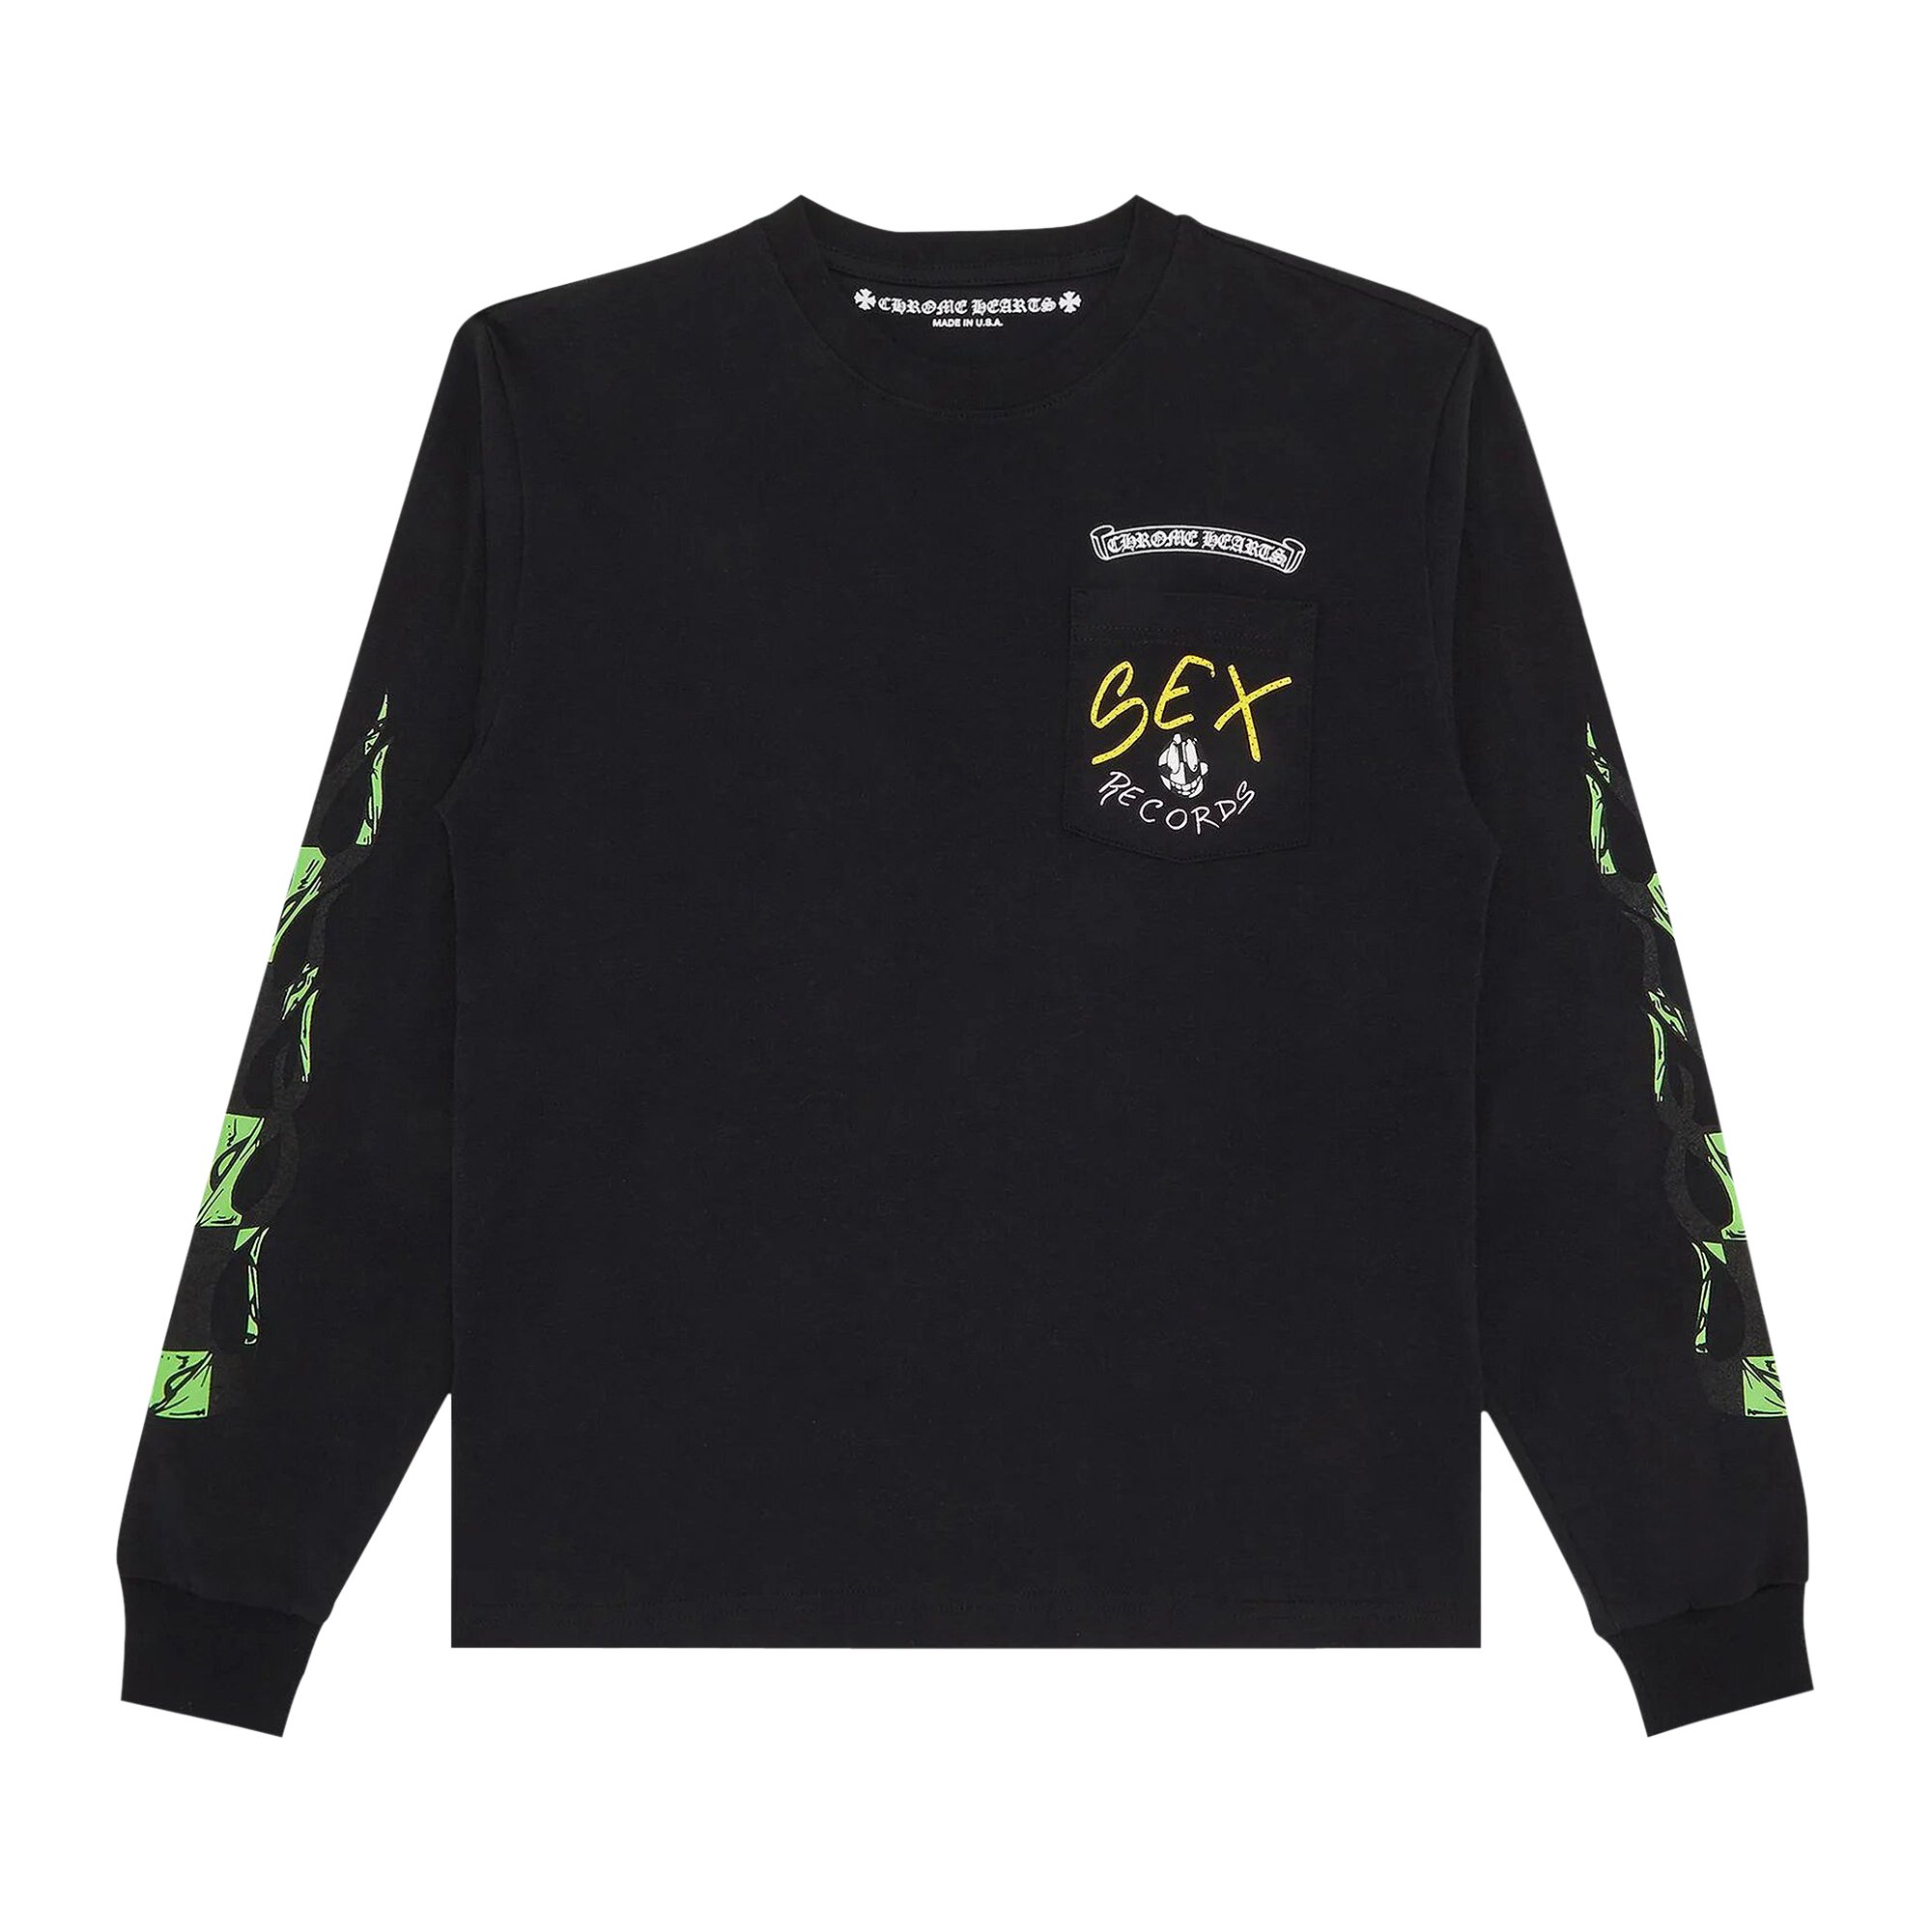 Buy Chrome Hearts x Matty Boy Sex Records It Is What It Is Long-Sleeve T- Shirt 'Black' - 1383 100000106MBSRIIWIILT BLAC | GOAT